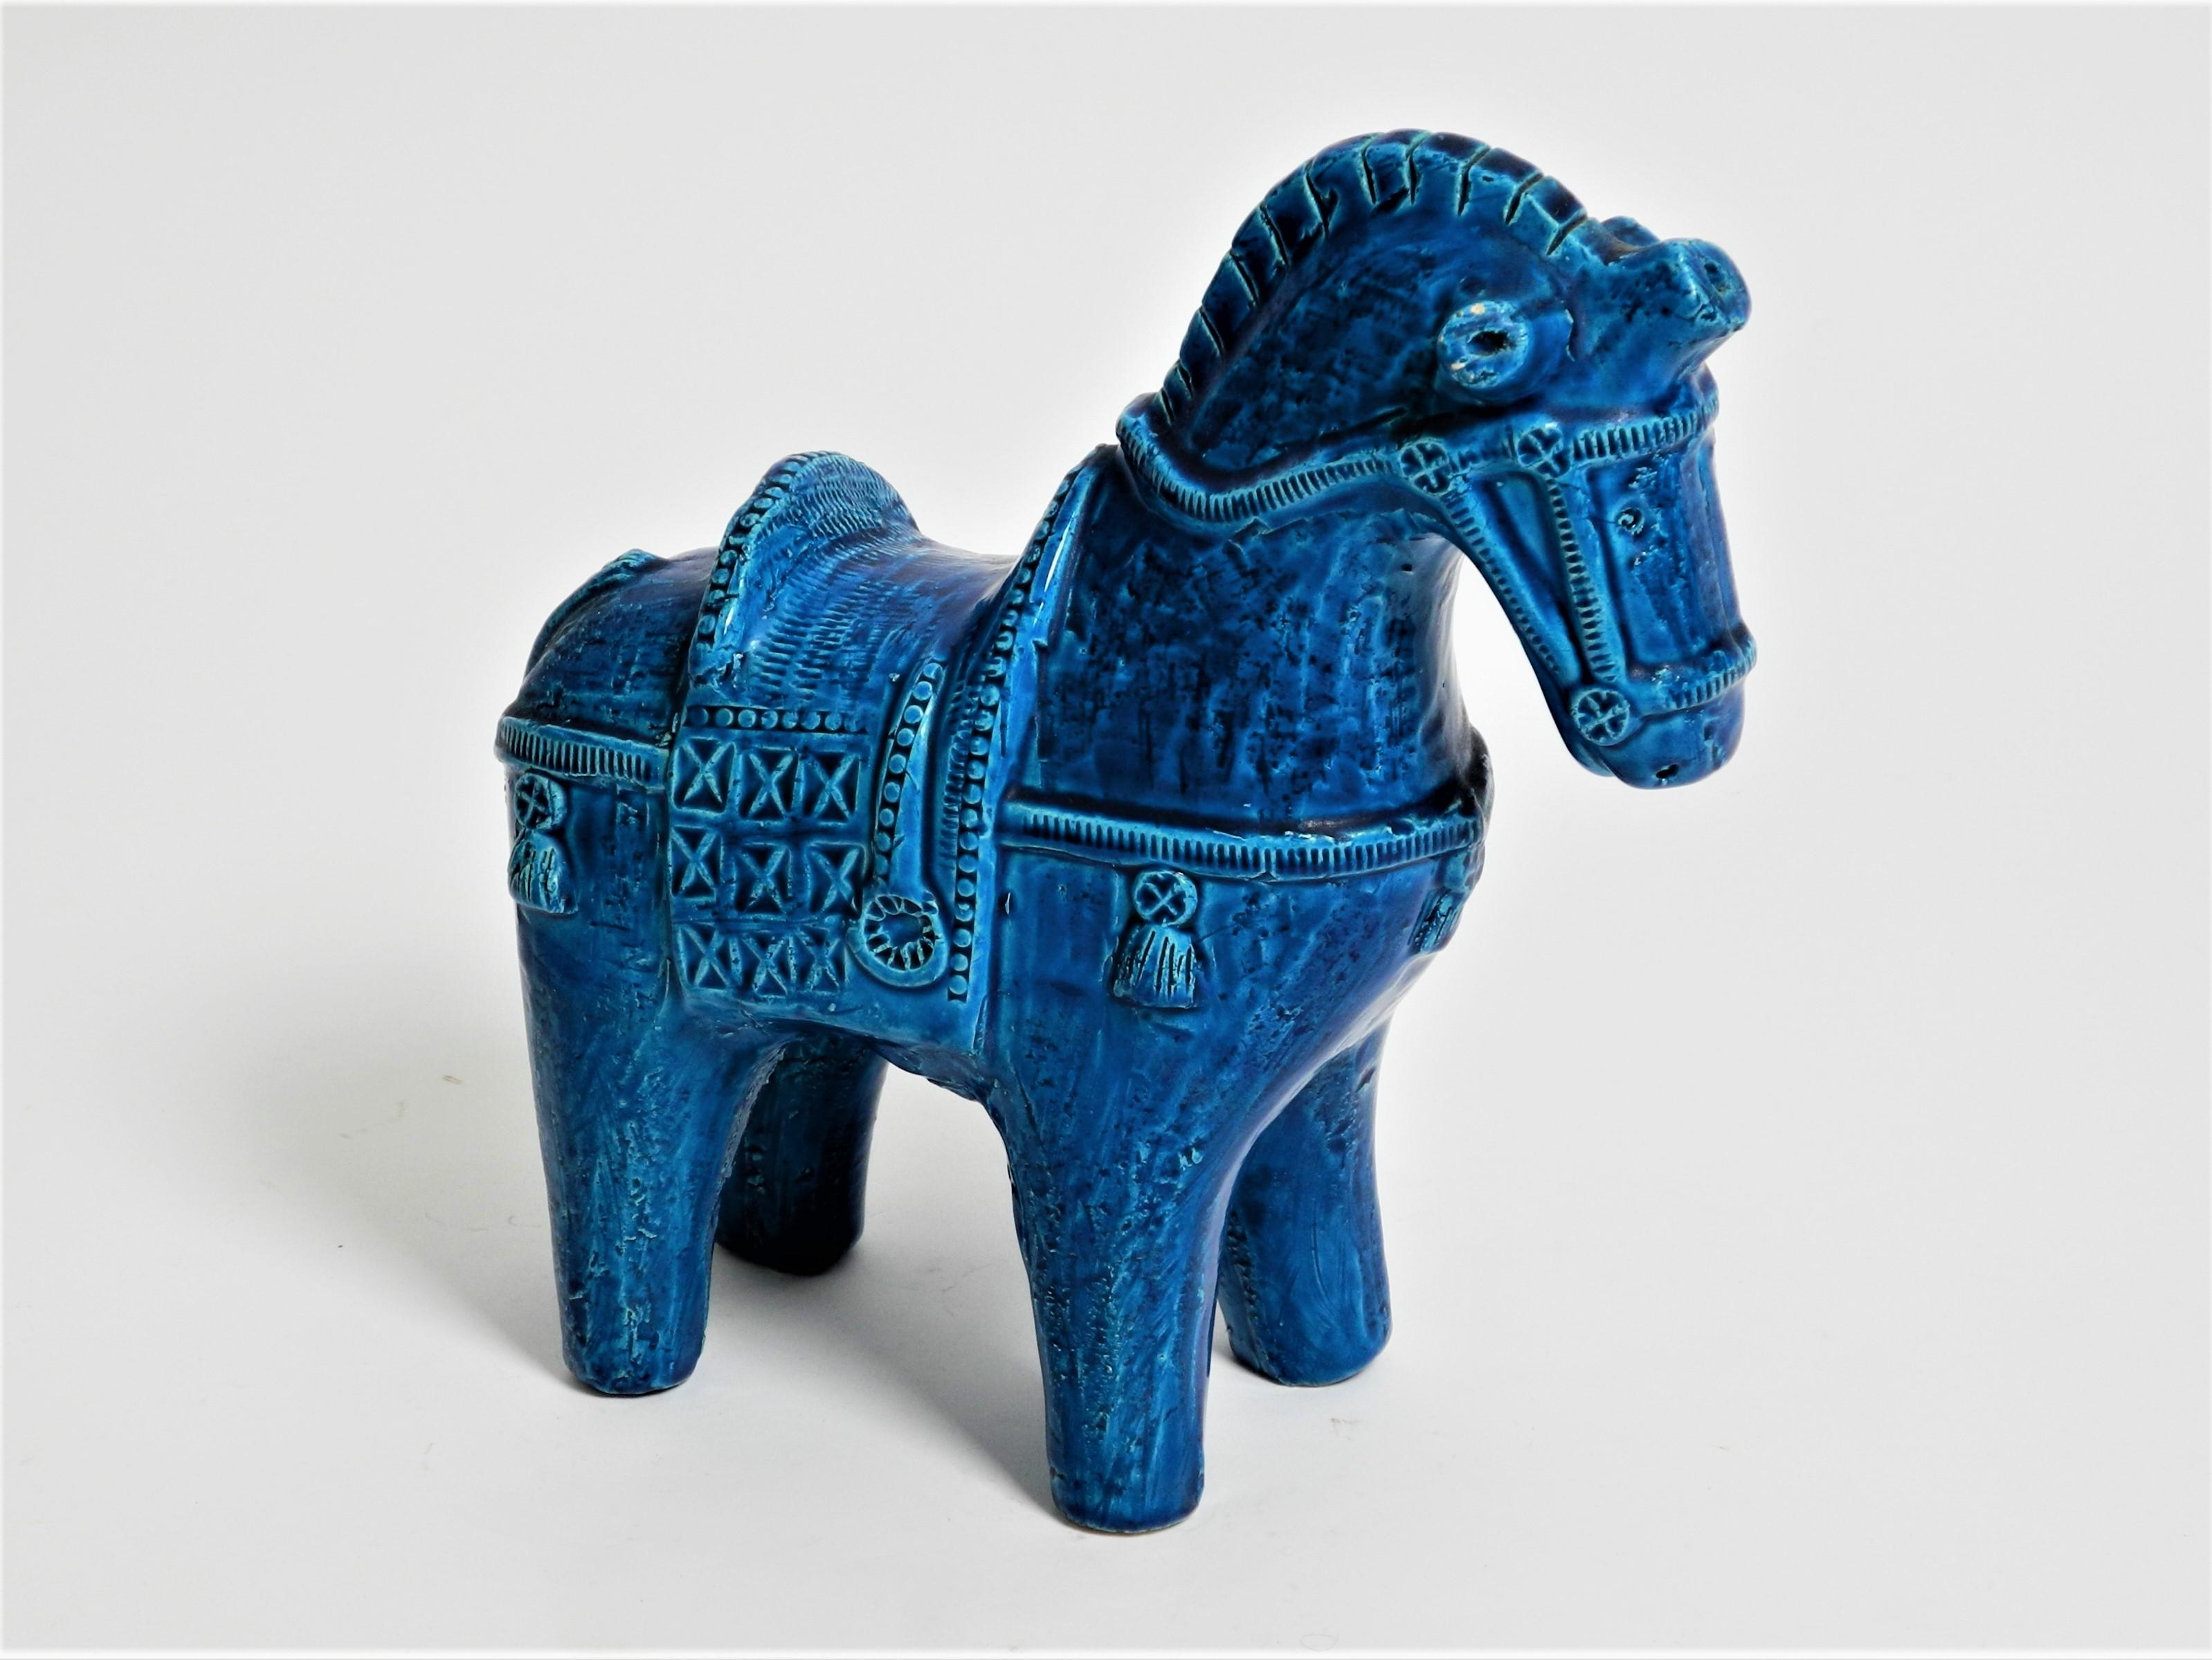 Ceramic horse sculpture from the 